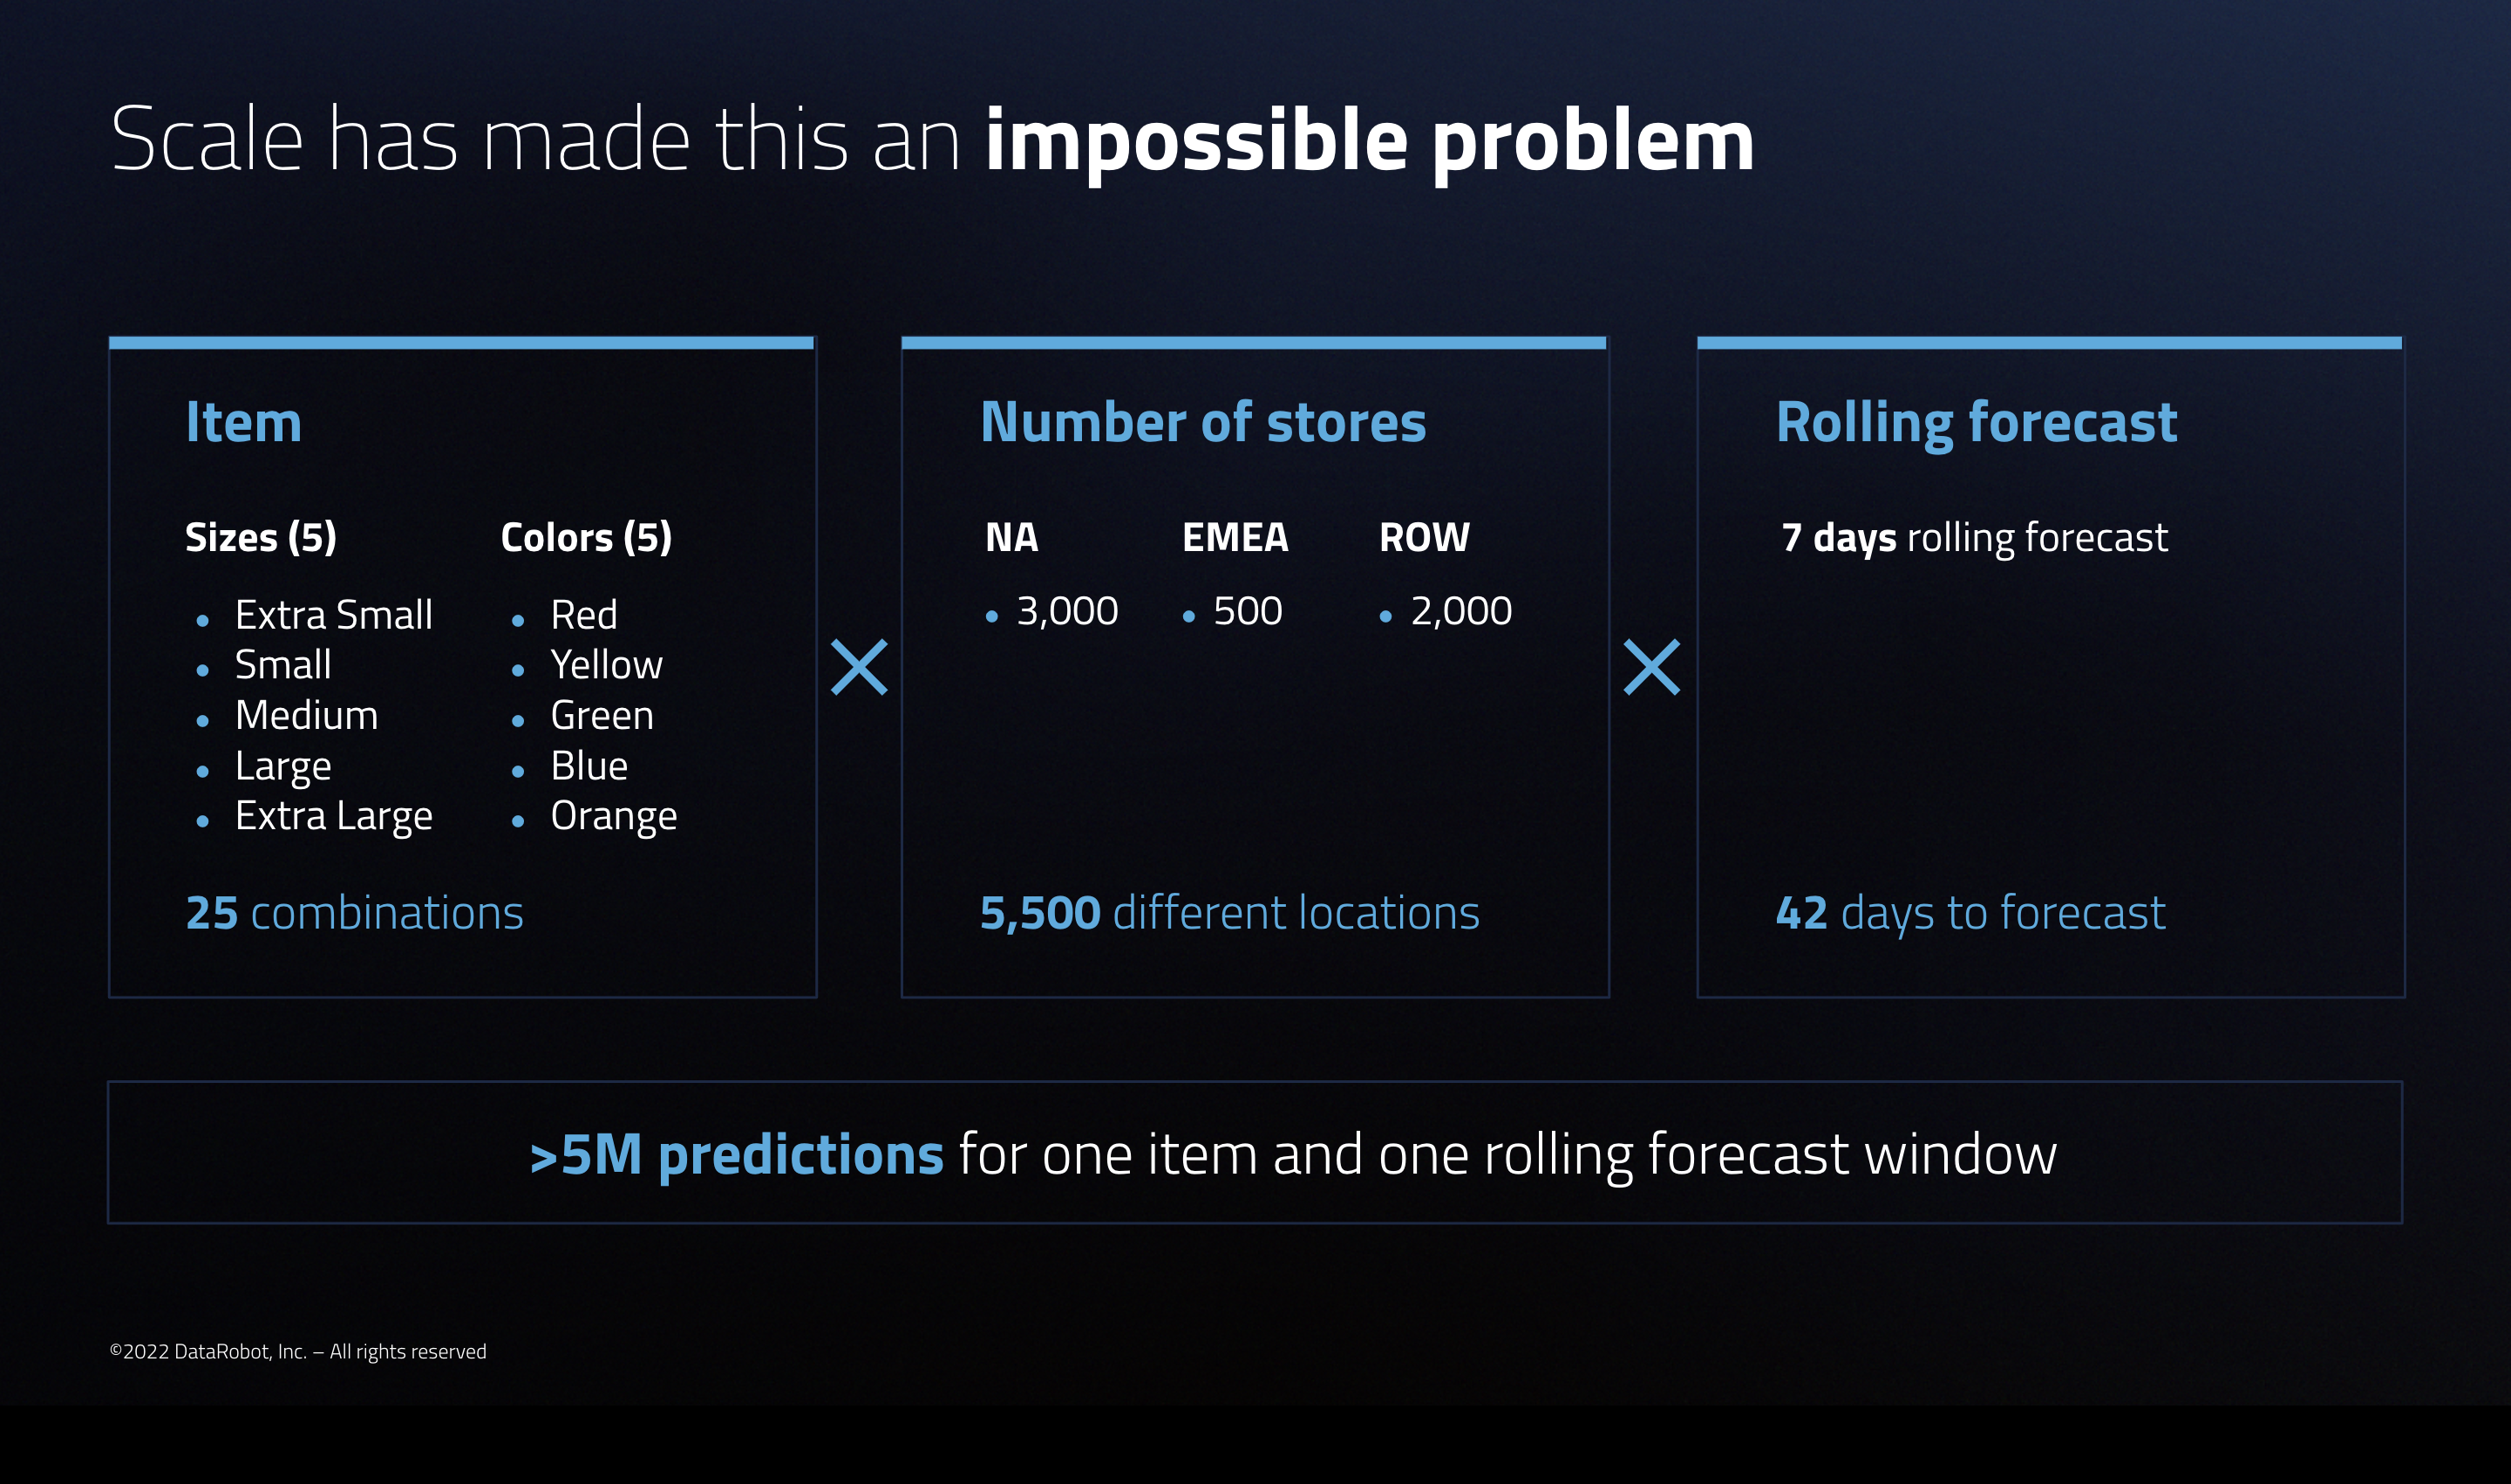 Forecasting for one single item leads to more than five million predictions
